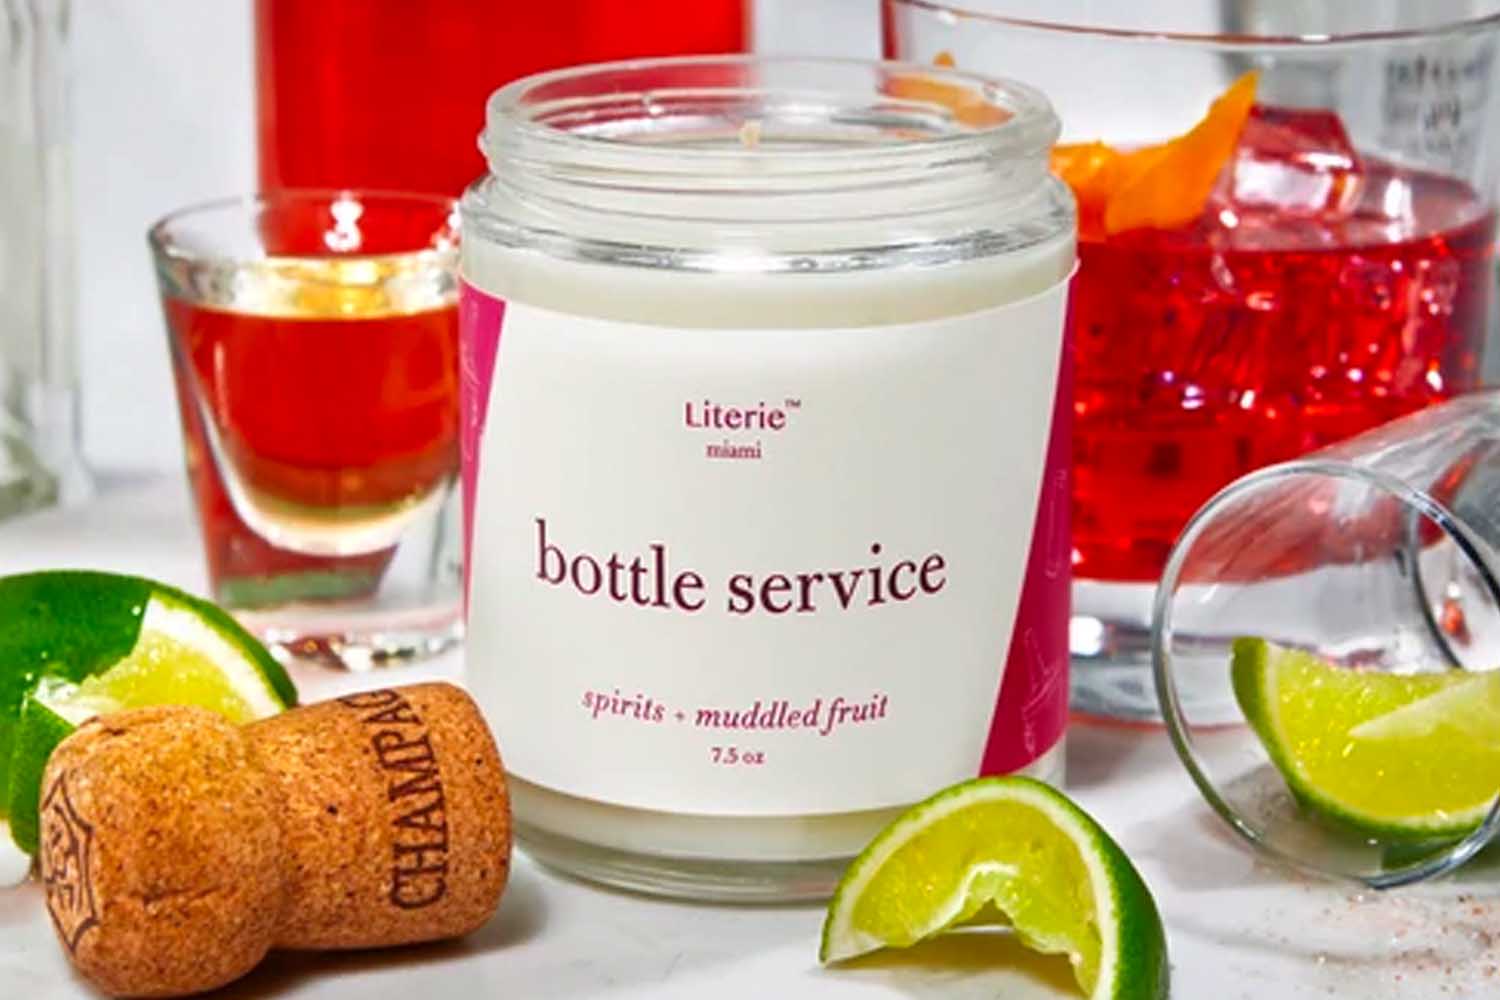 A white candle with a white and purple label that reads "bottle service, spirits + muddled fruit" surrounded by cocktails, limes and a champagne cork from Literie, a perfect Valentine’s Day gift for 2022.